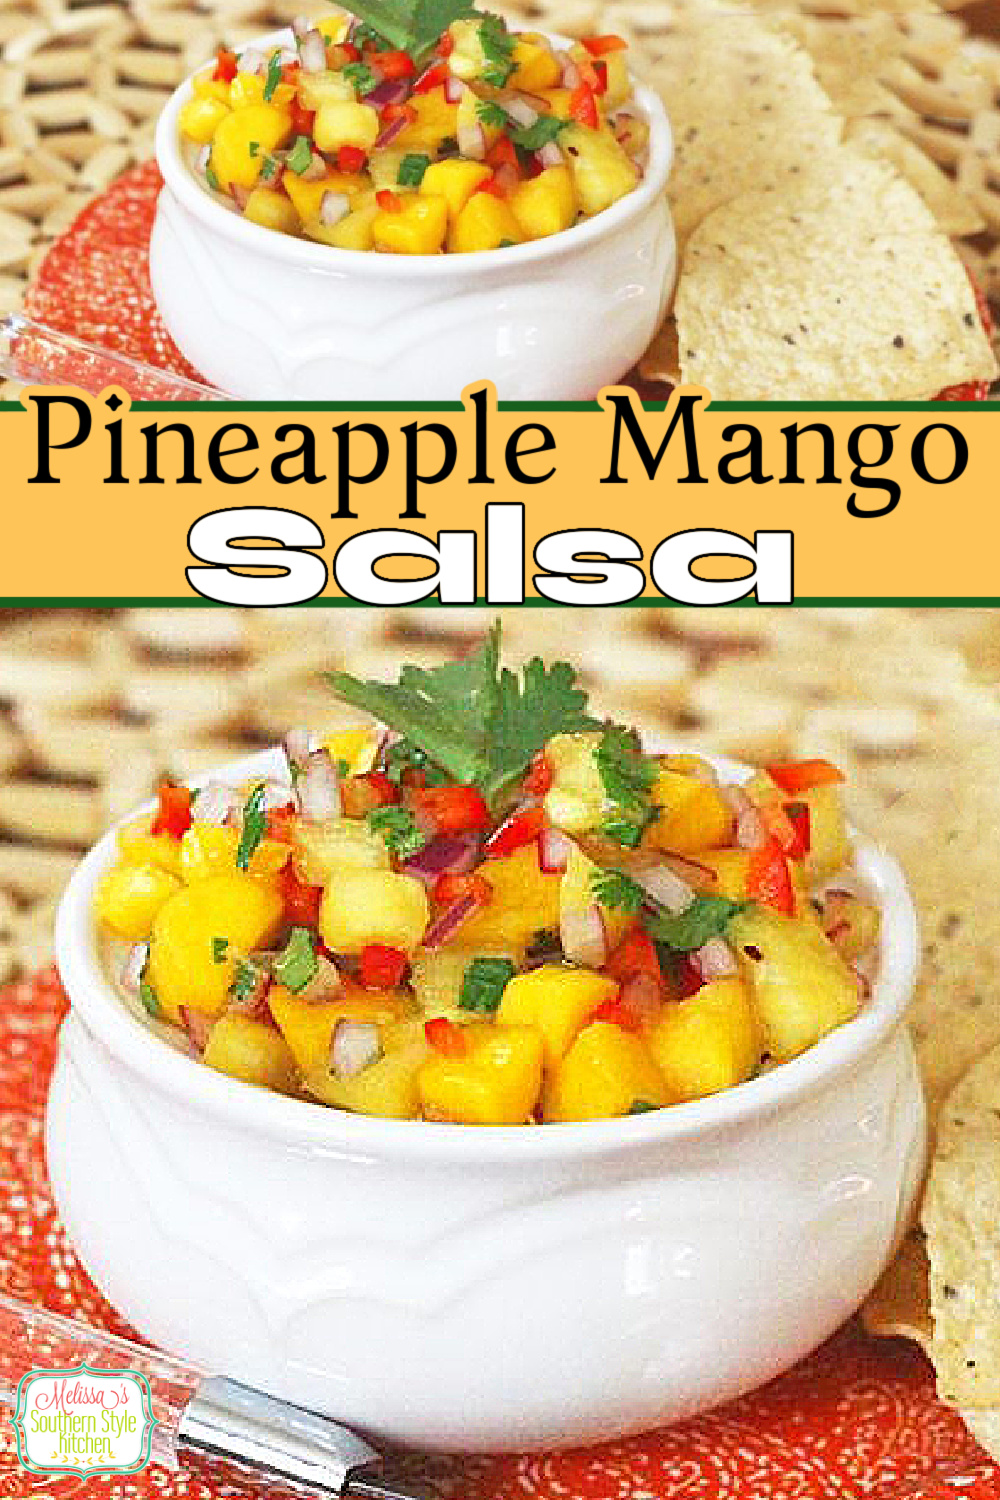 This easy fresh Pineapple Mango Salsa recipe complements chicken, pork and seafood or serve it as a dip with tortilla chips #mangoes #pineapplemangosalsa #fruitsalsa #salsarecipes #healthysalsarecipe #mangosalsa #mexicanfood via @melissasssk